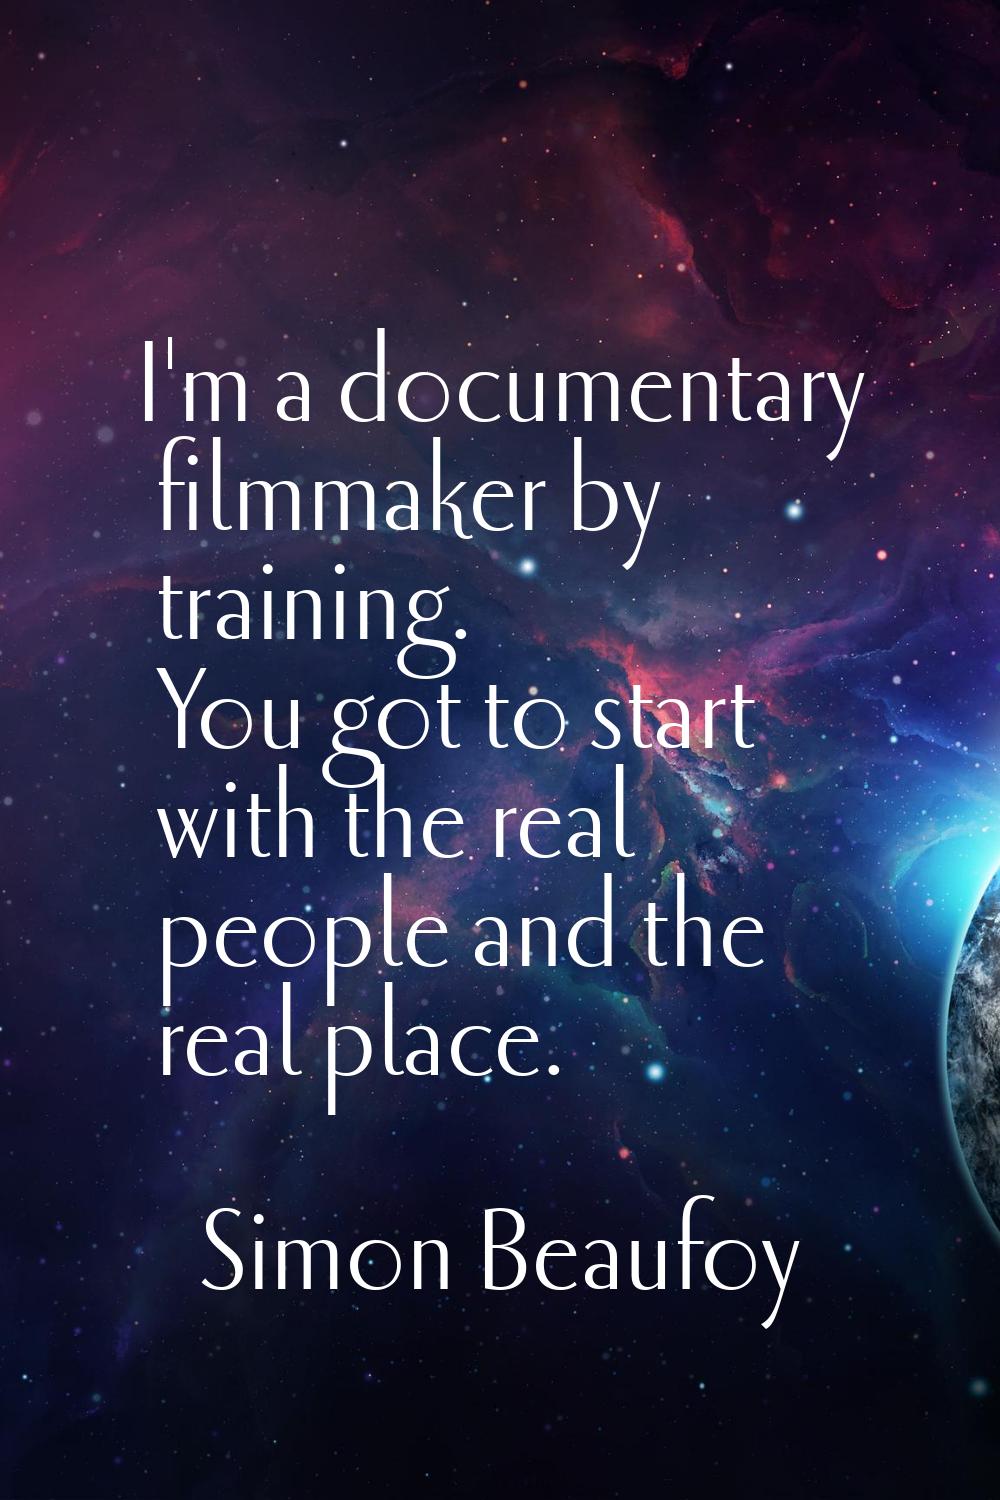 I'm a documentary filmmaker by training. You got to start with the real people and the real place.